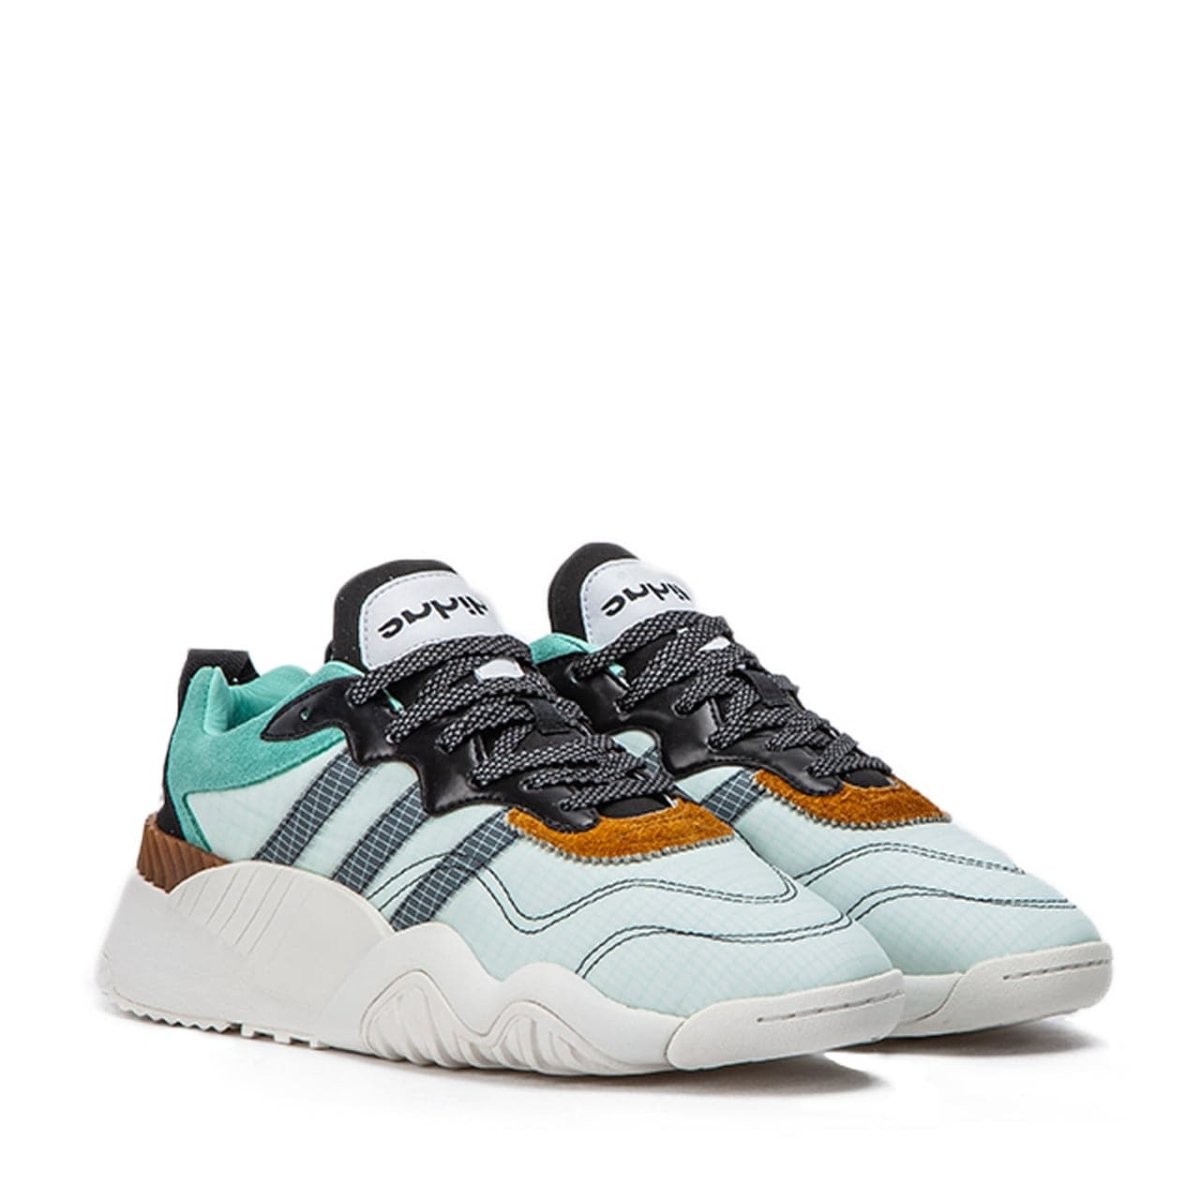 adidas by Alexander Wang AW Turnout Trainer (Mint / Black) DB2613